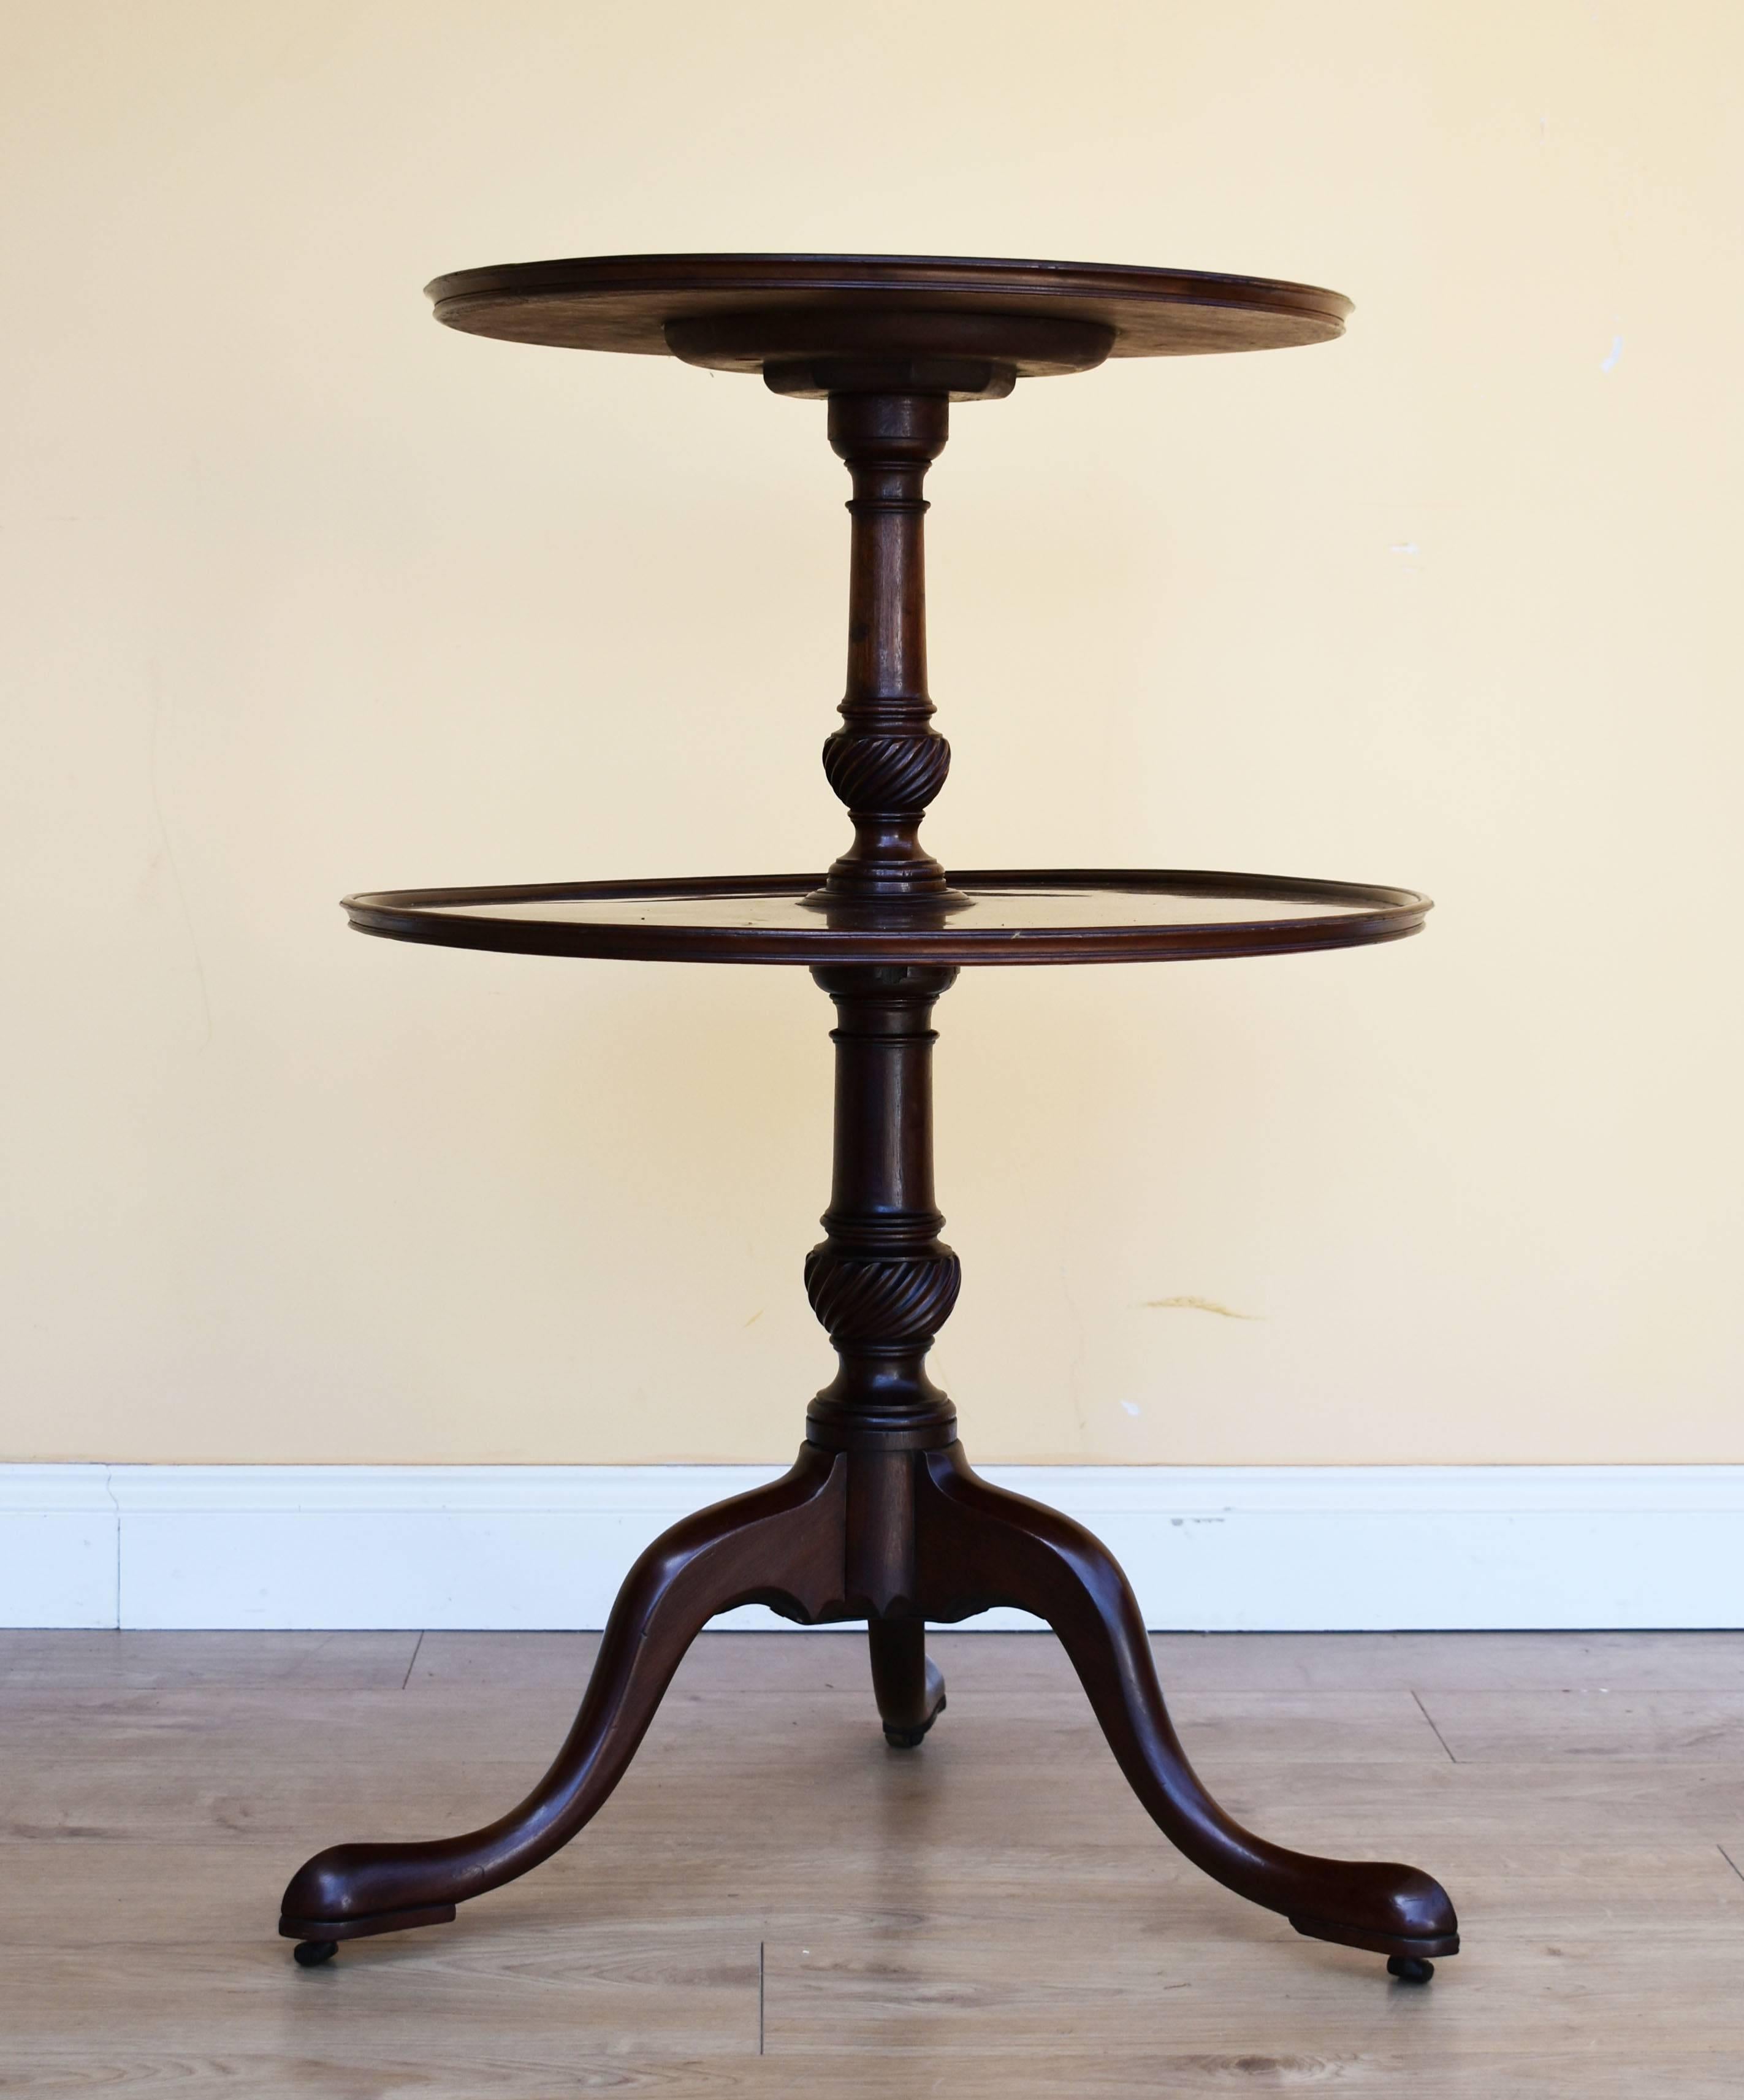 For sale is a good quality George III Mahogany Two Tier Dumbwaiter. Having two nicely turned supports, and standing on elegantly shaped legs, this dumbwaiter is in very good, original condition. 

Width: 25